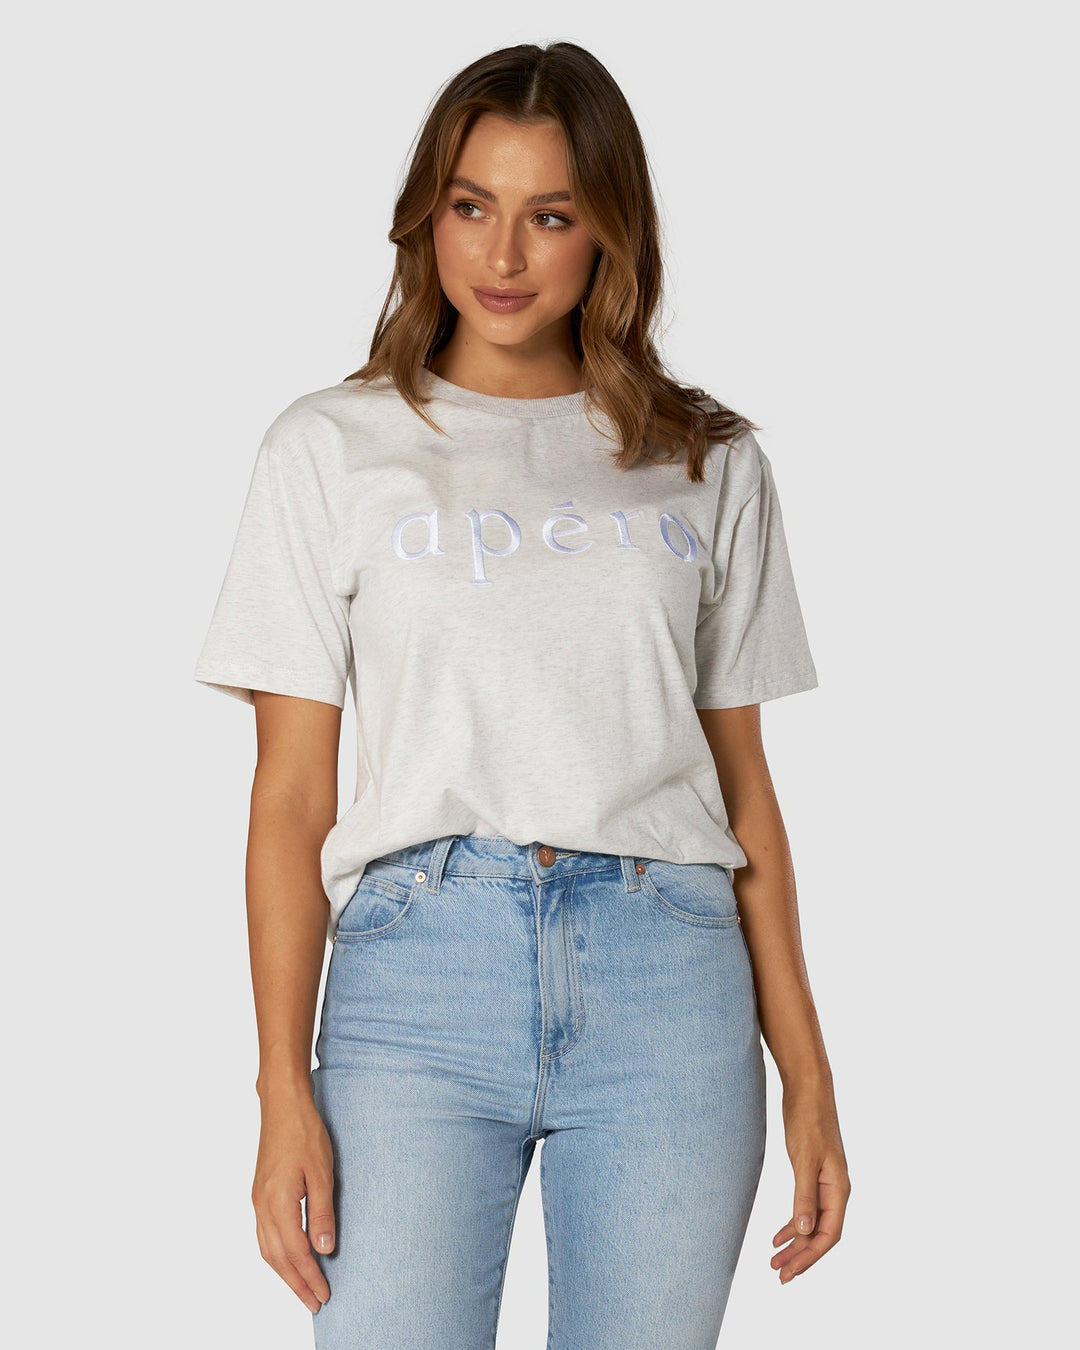 La Mode  Embroidered Femme Tee - Grey Marle